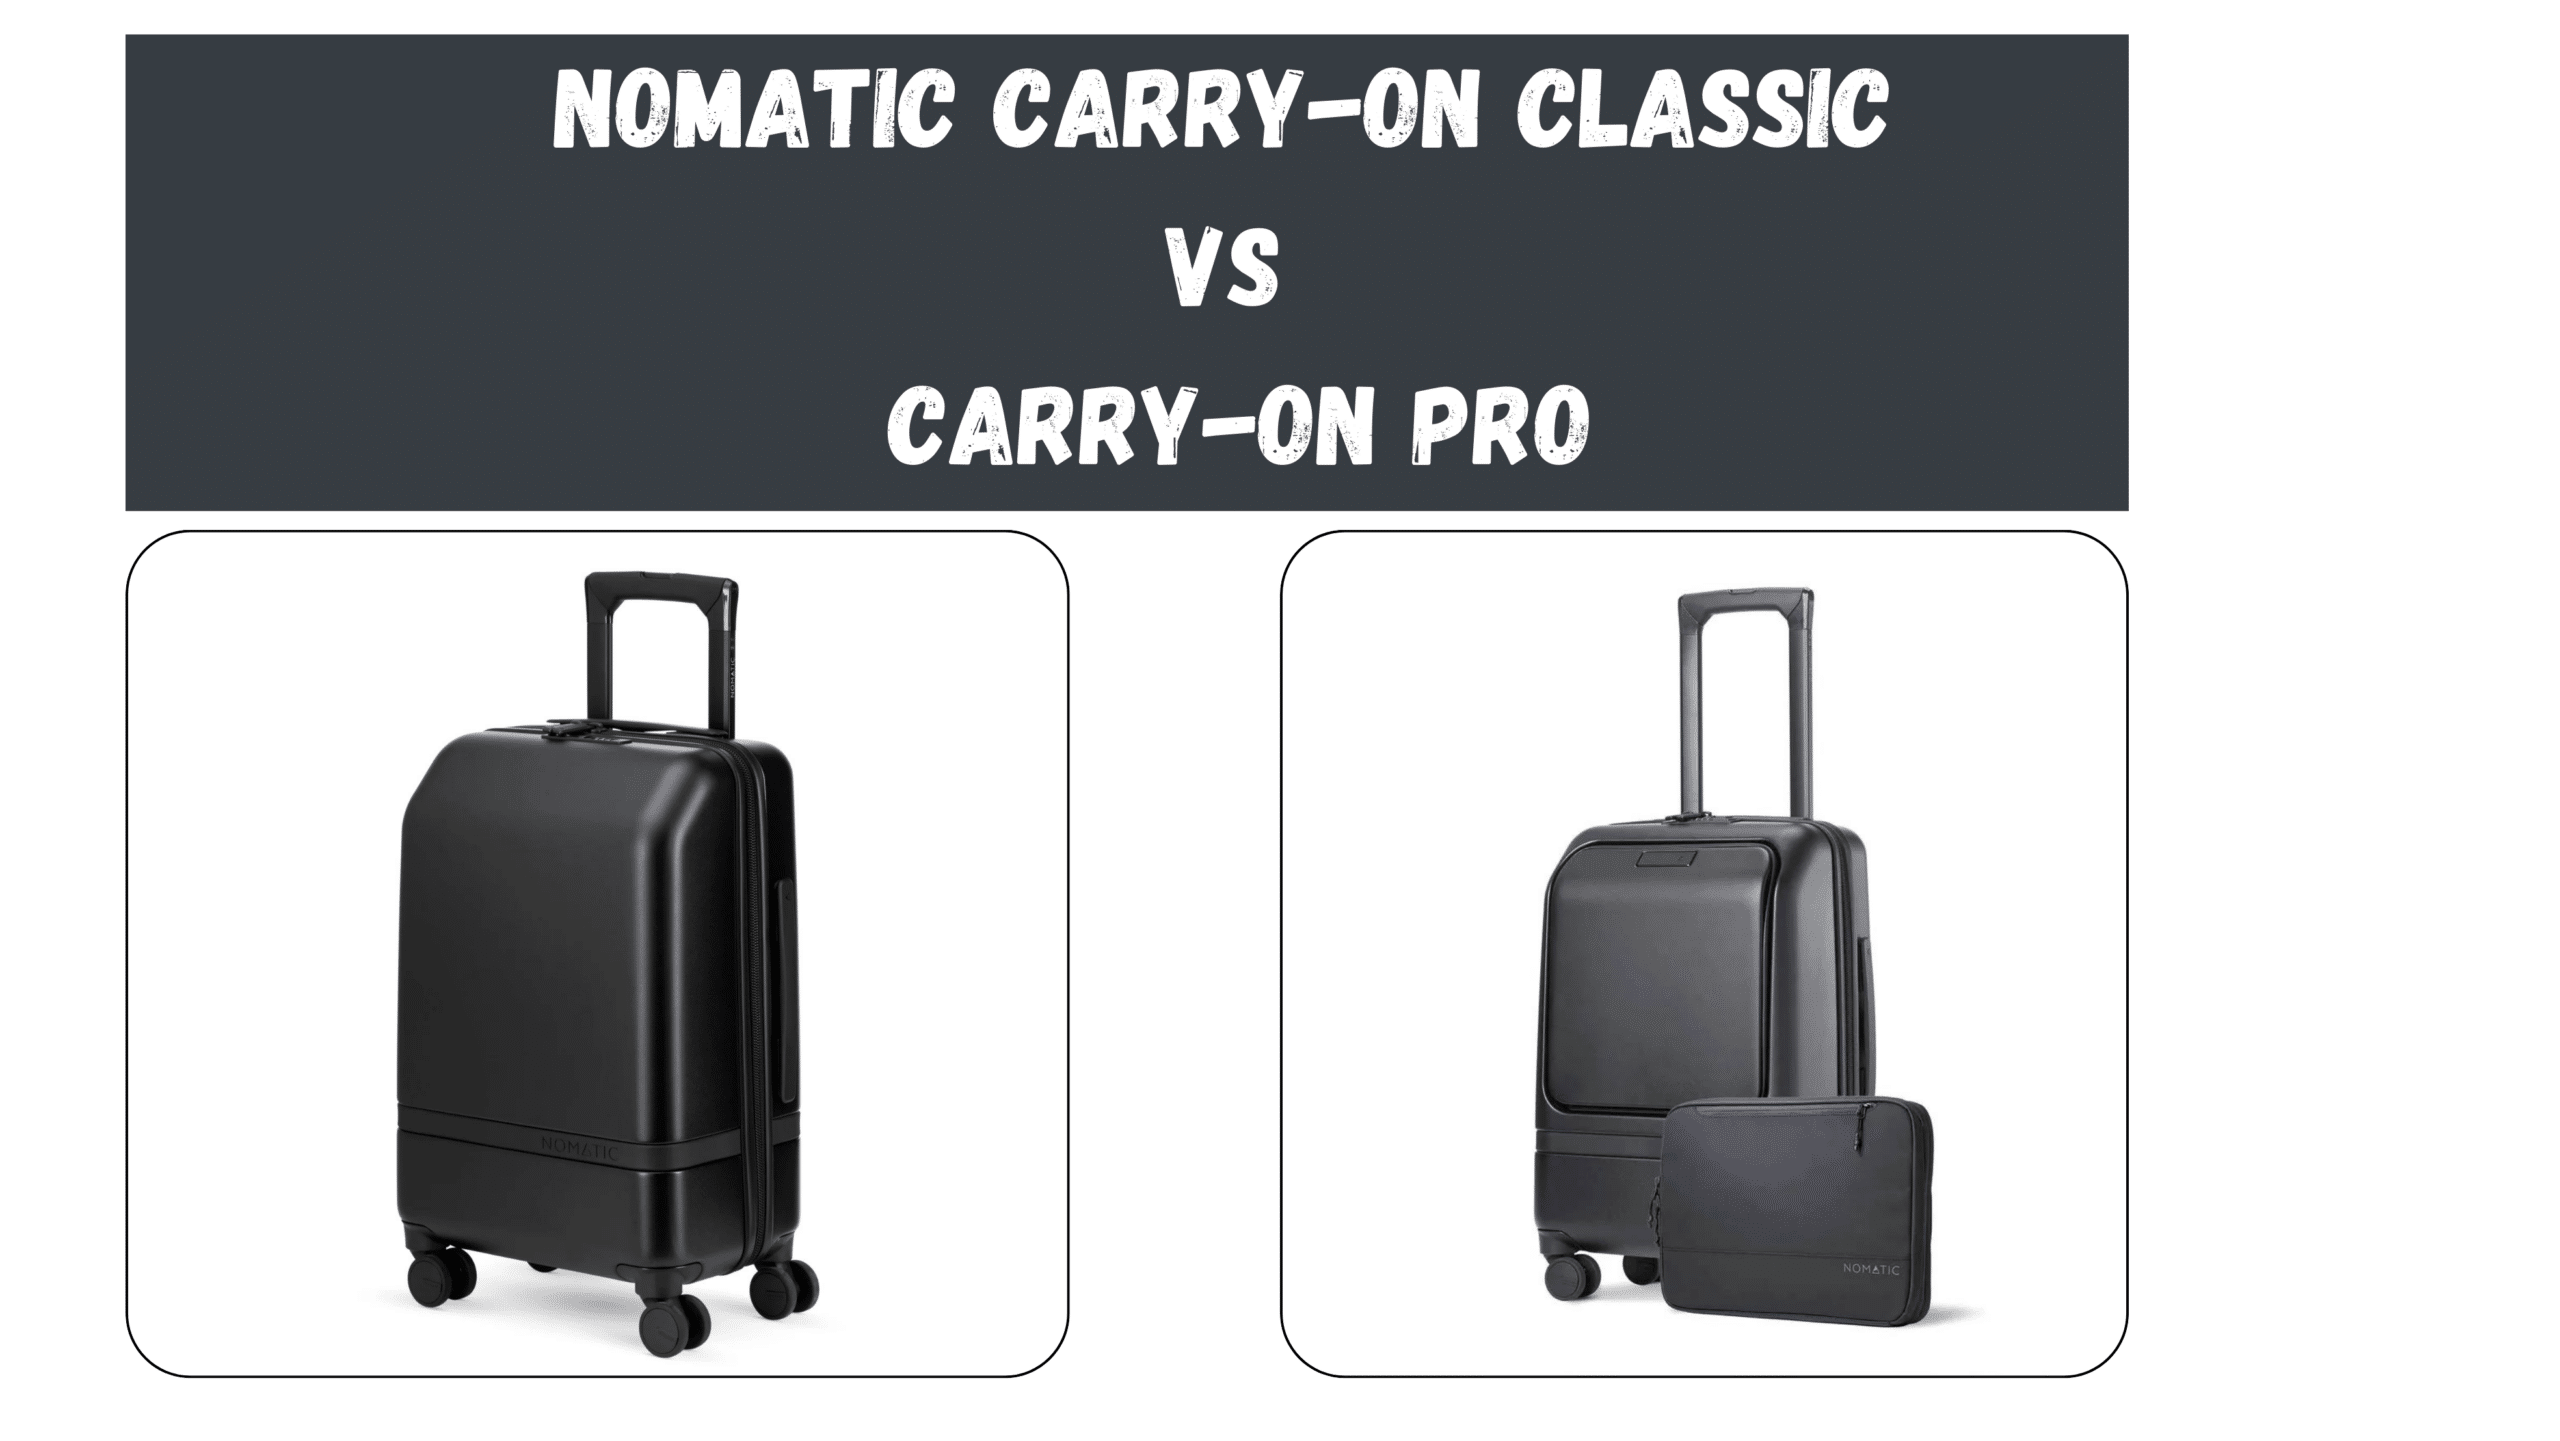 Nomatic Carry-On Classic Vs Carry-On Pro